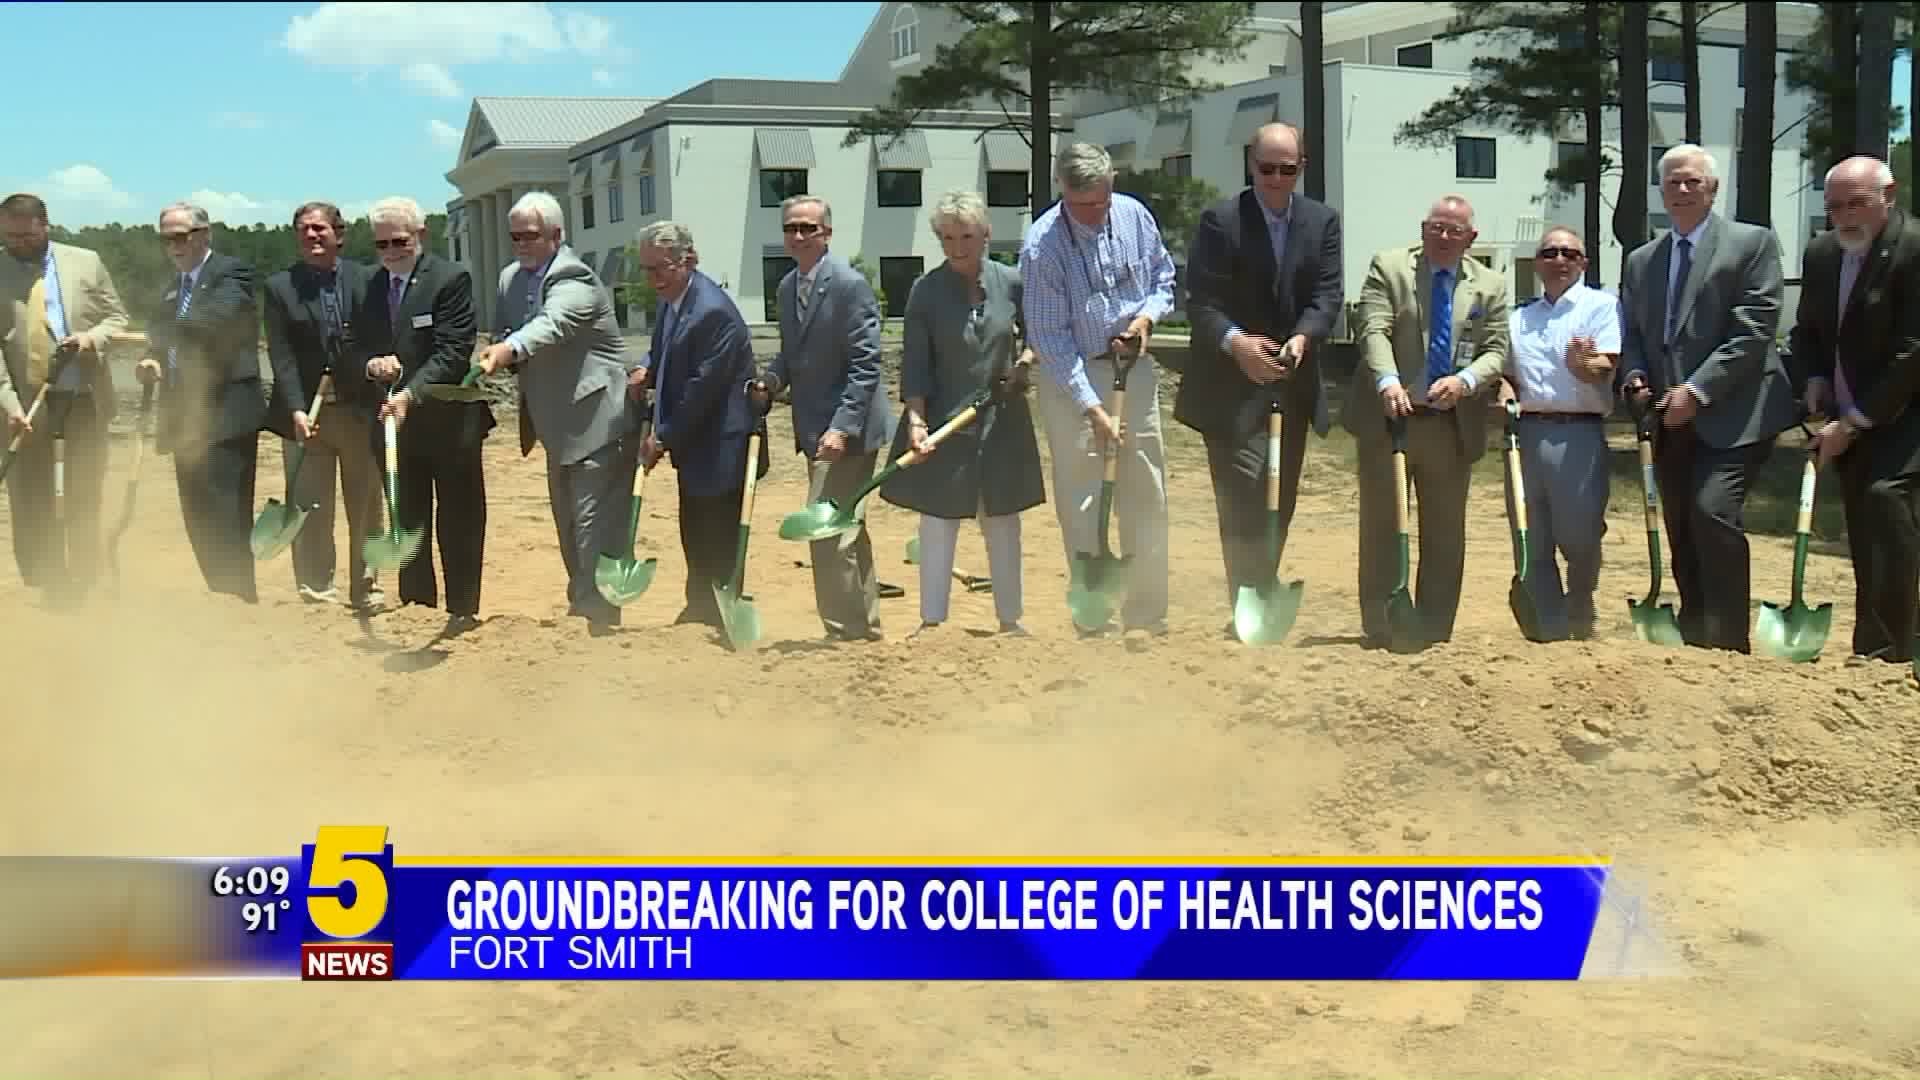 Groundbreaking for College of Health Sciences